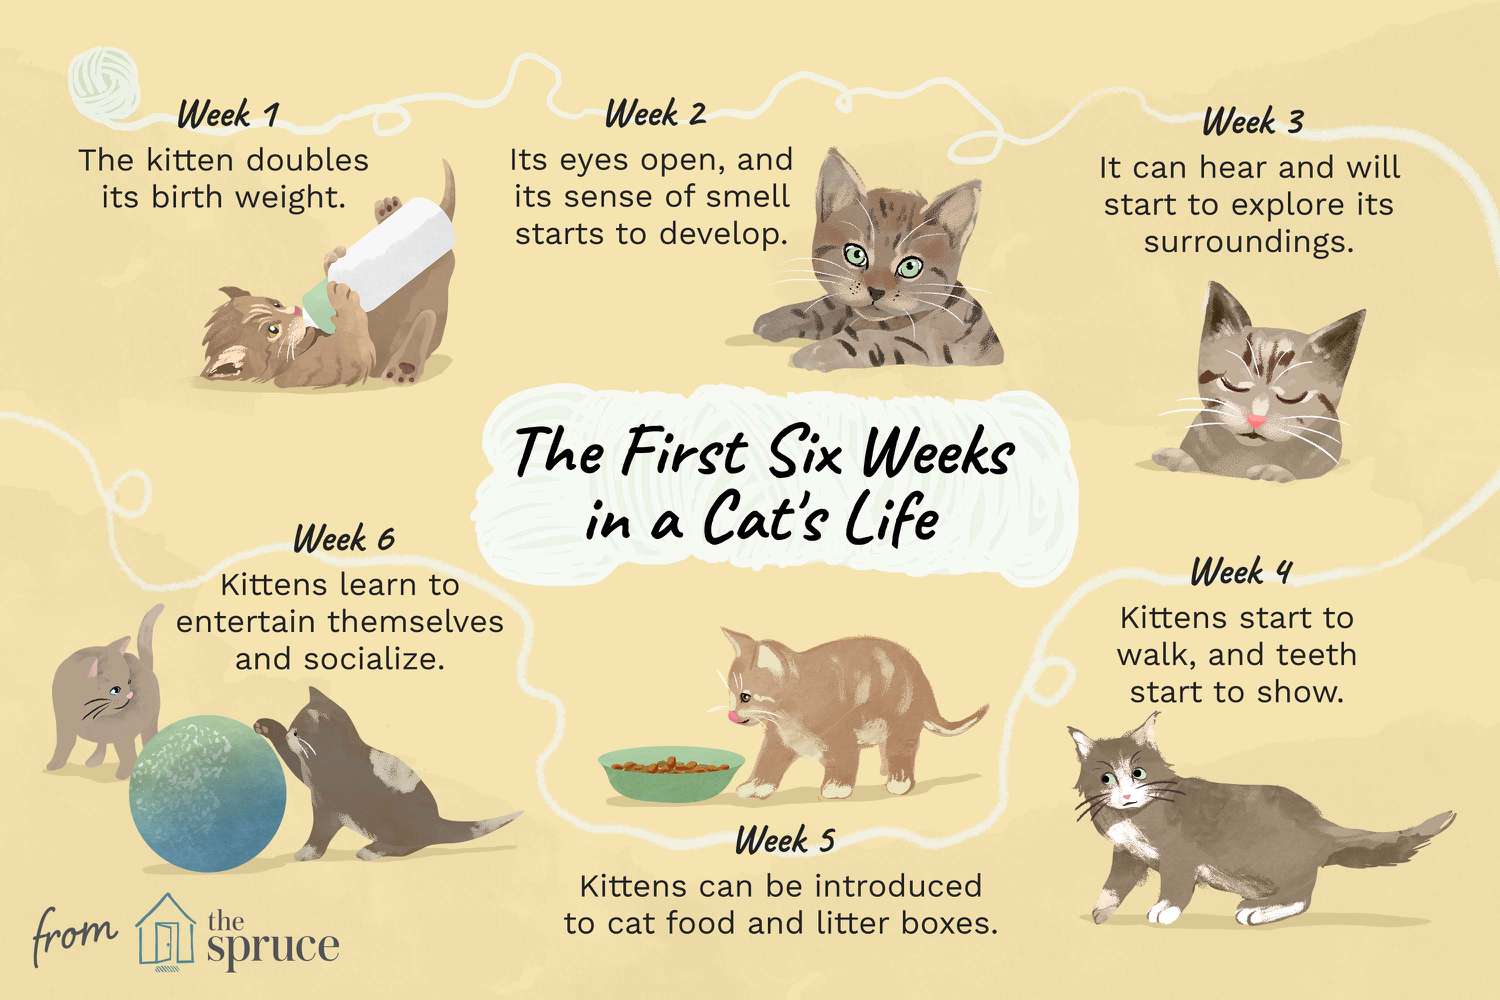 The First Six Weeks in a Cat's Life